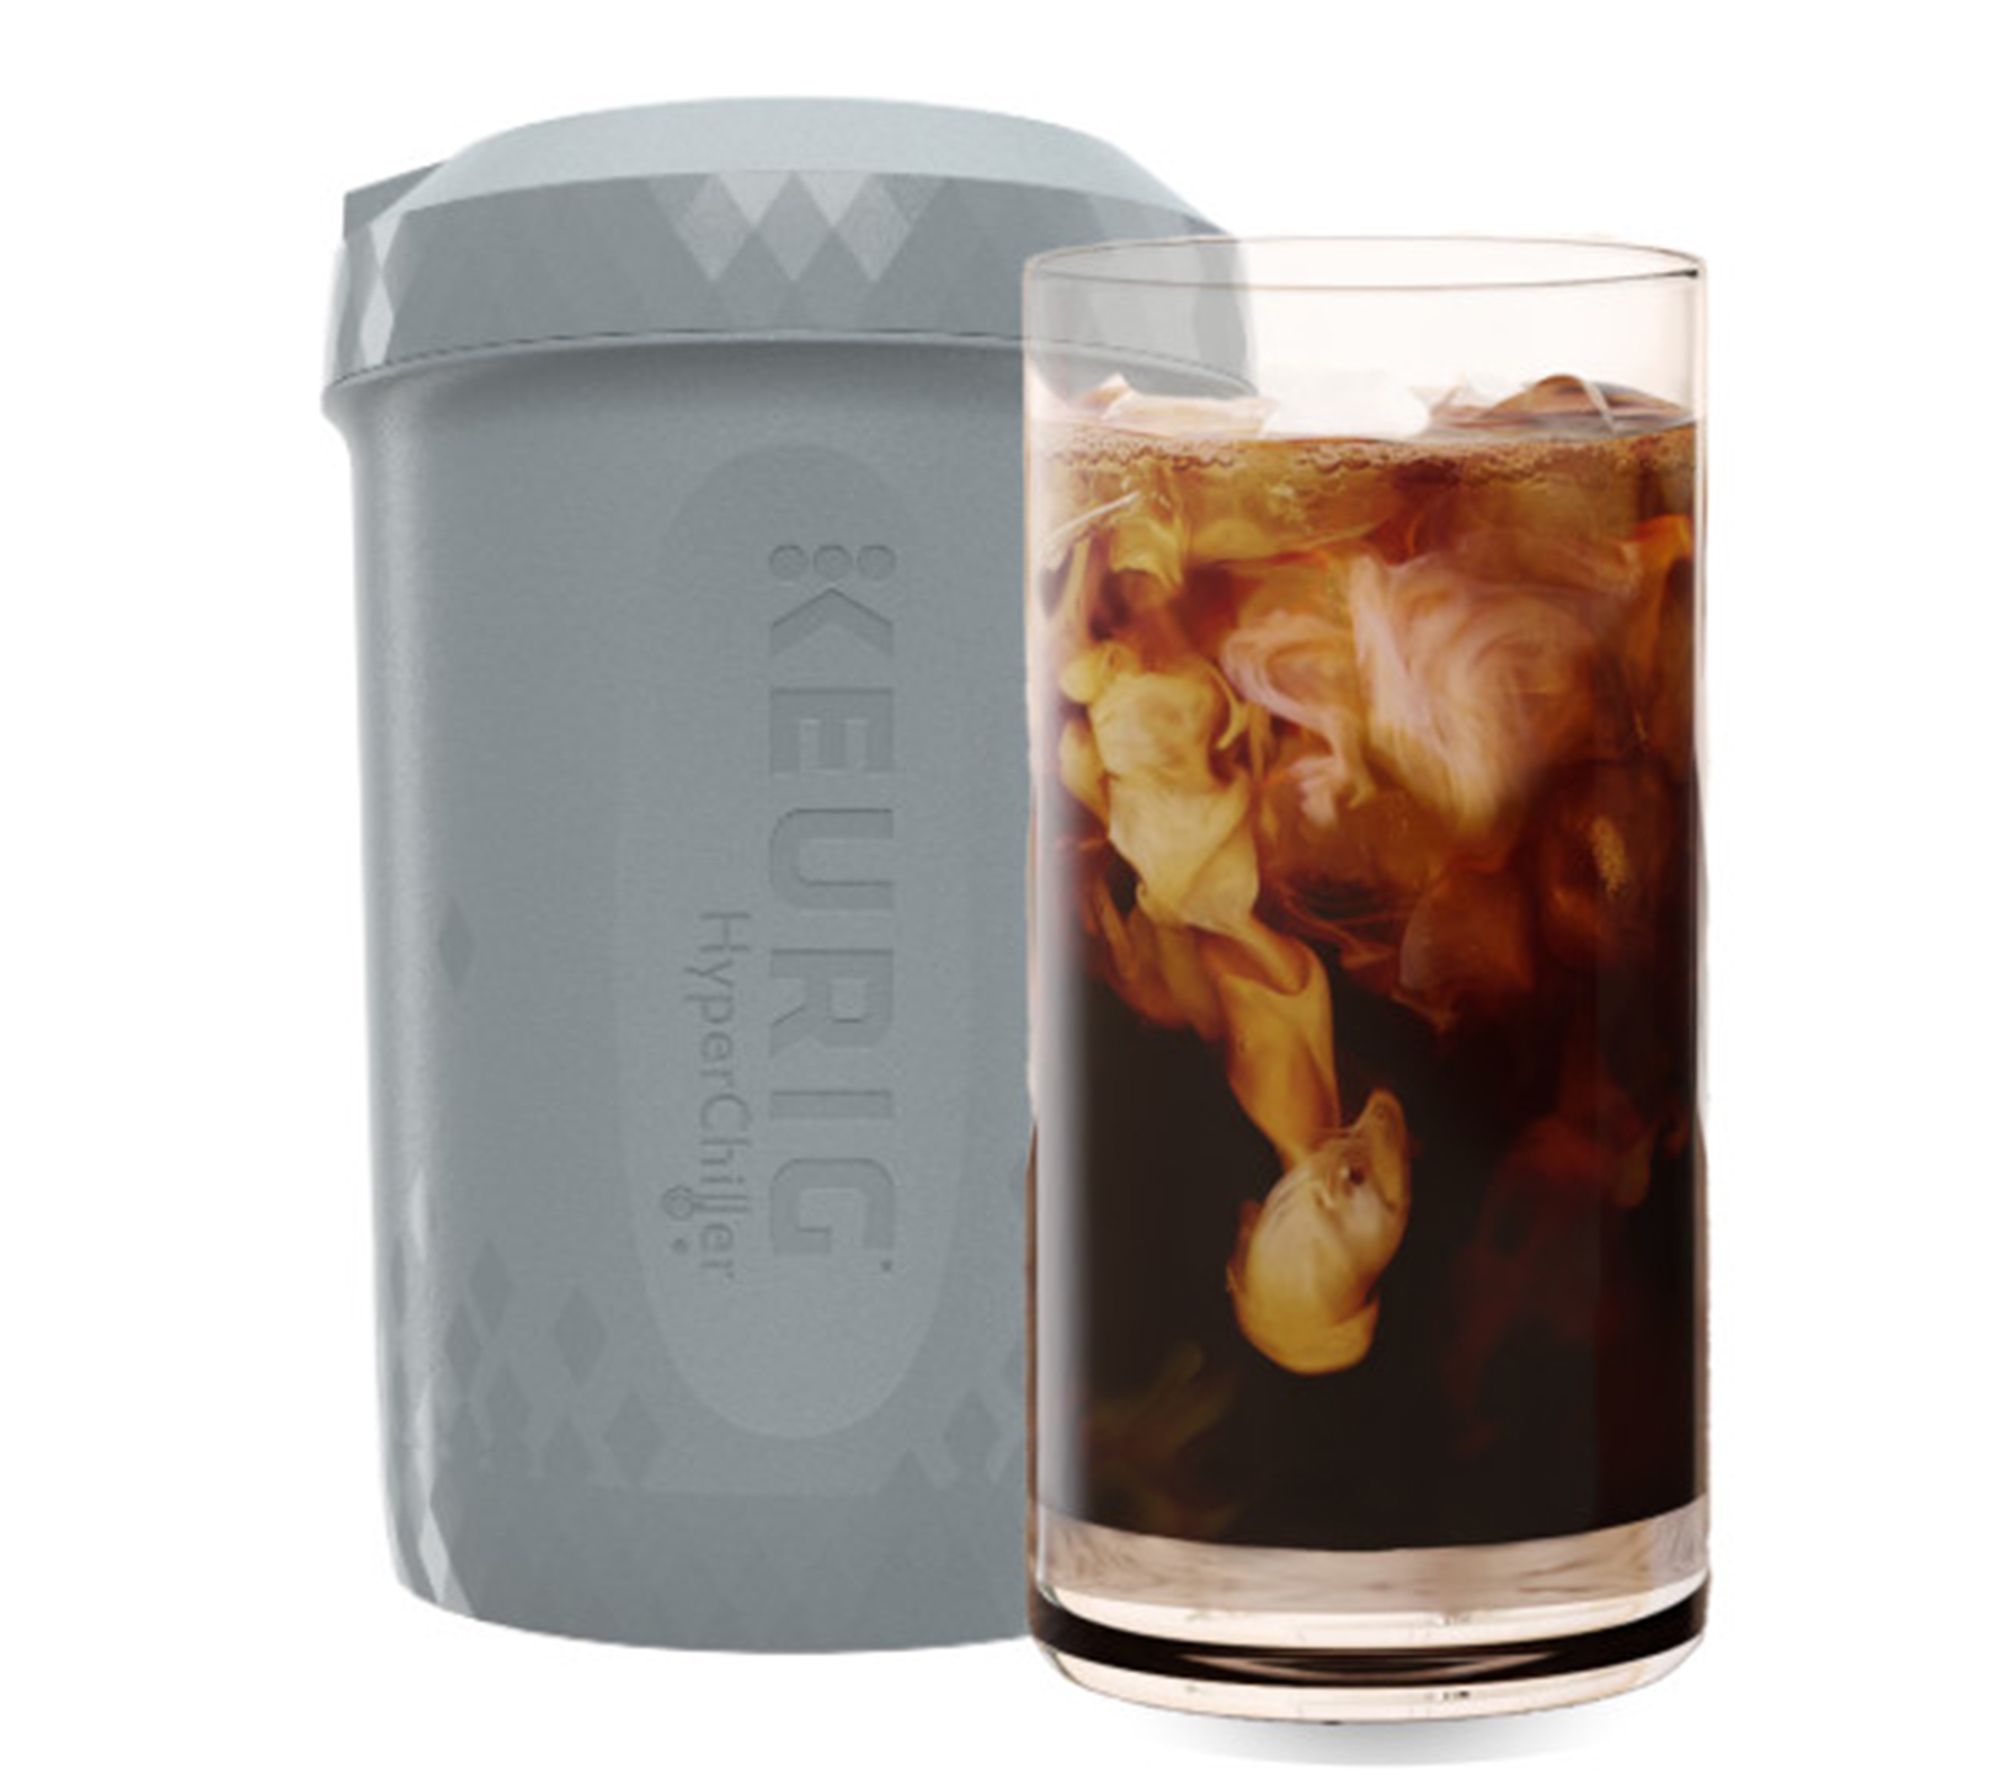 Keurig® Launches ICED Innovation to Bring Delicious Café Quality Iced Coffee  to All